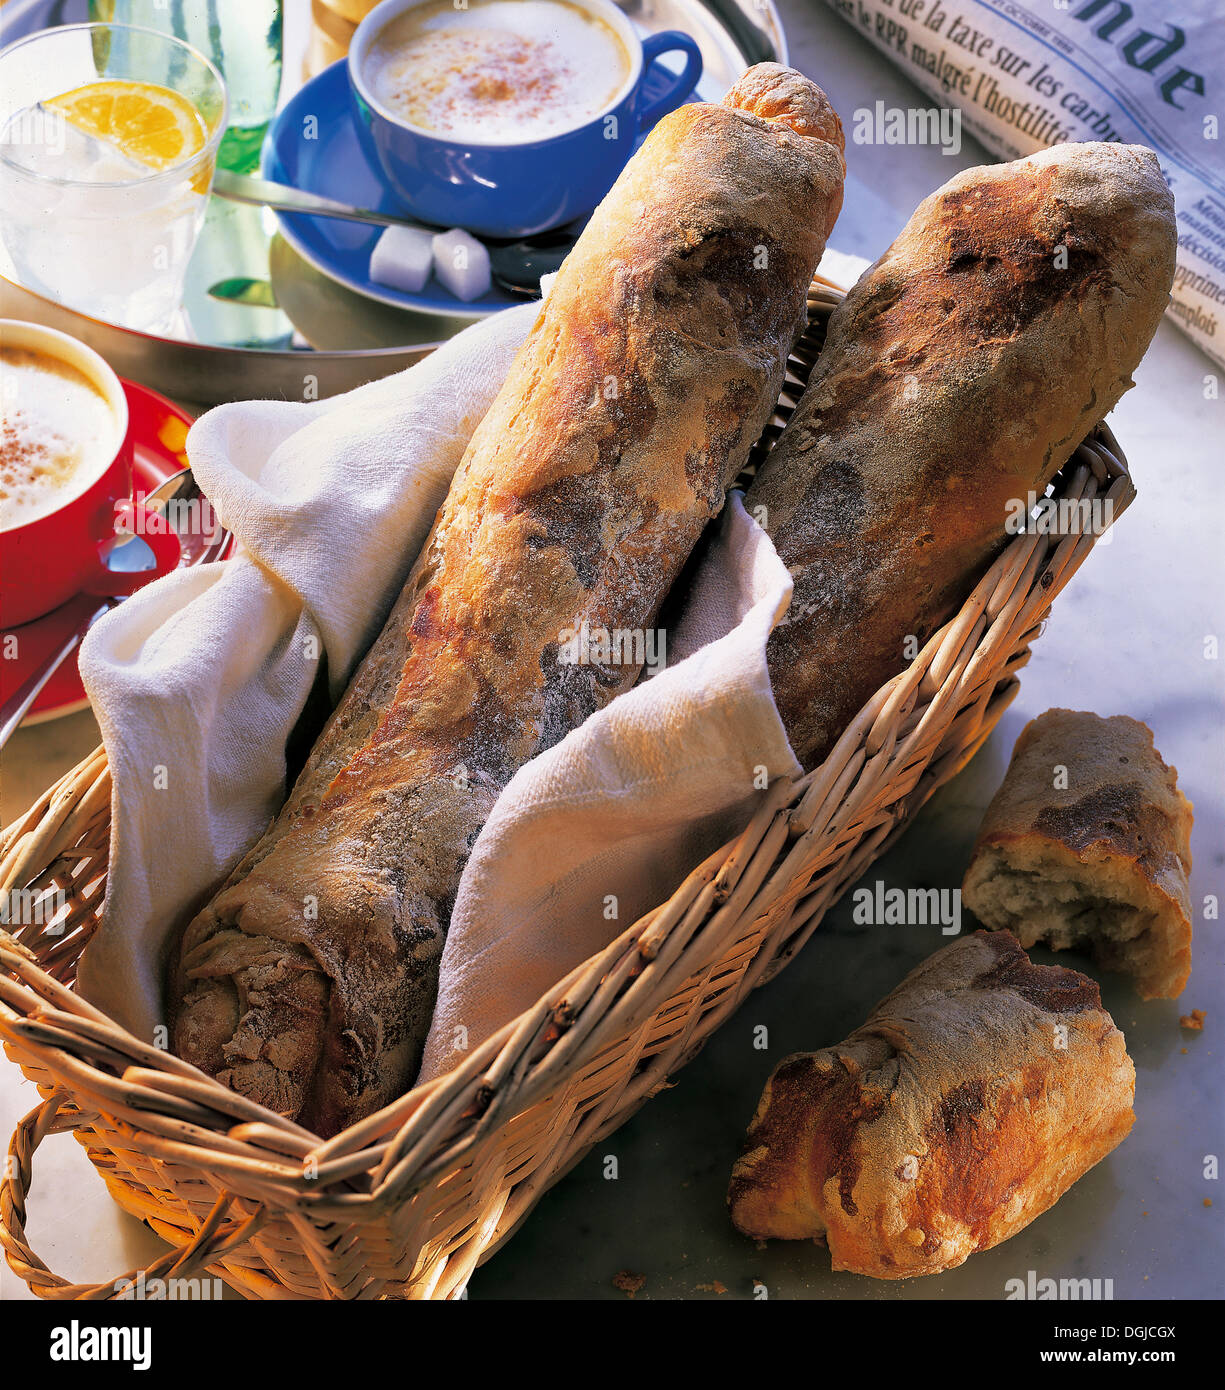 Crusty baguette, France. Stock Photo